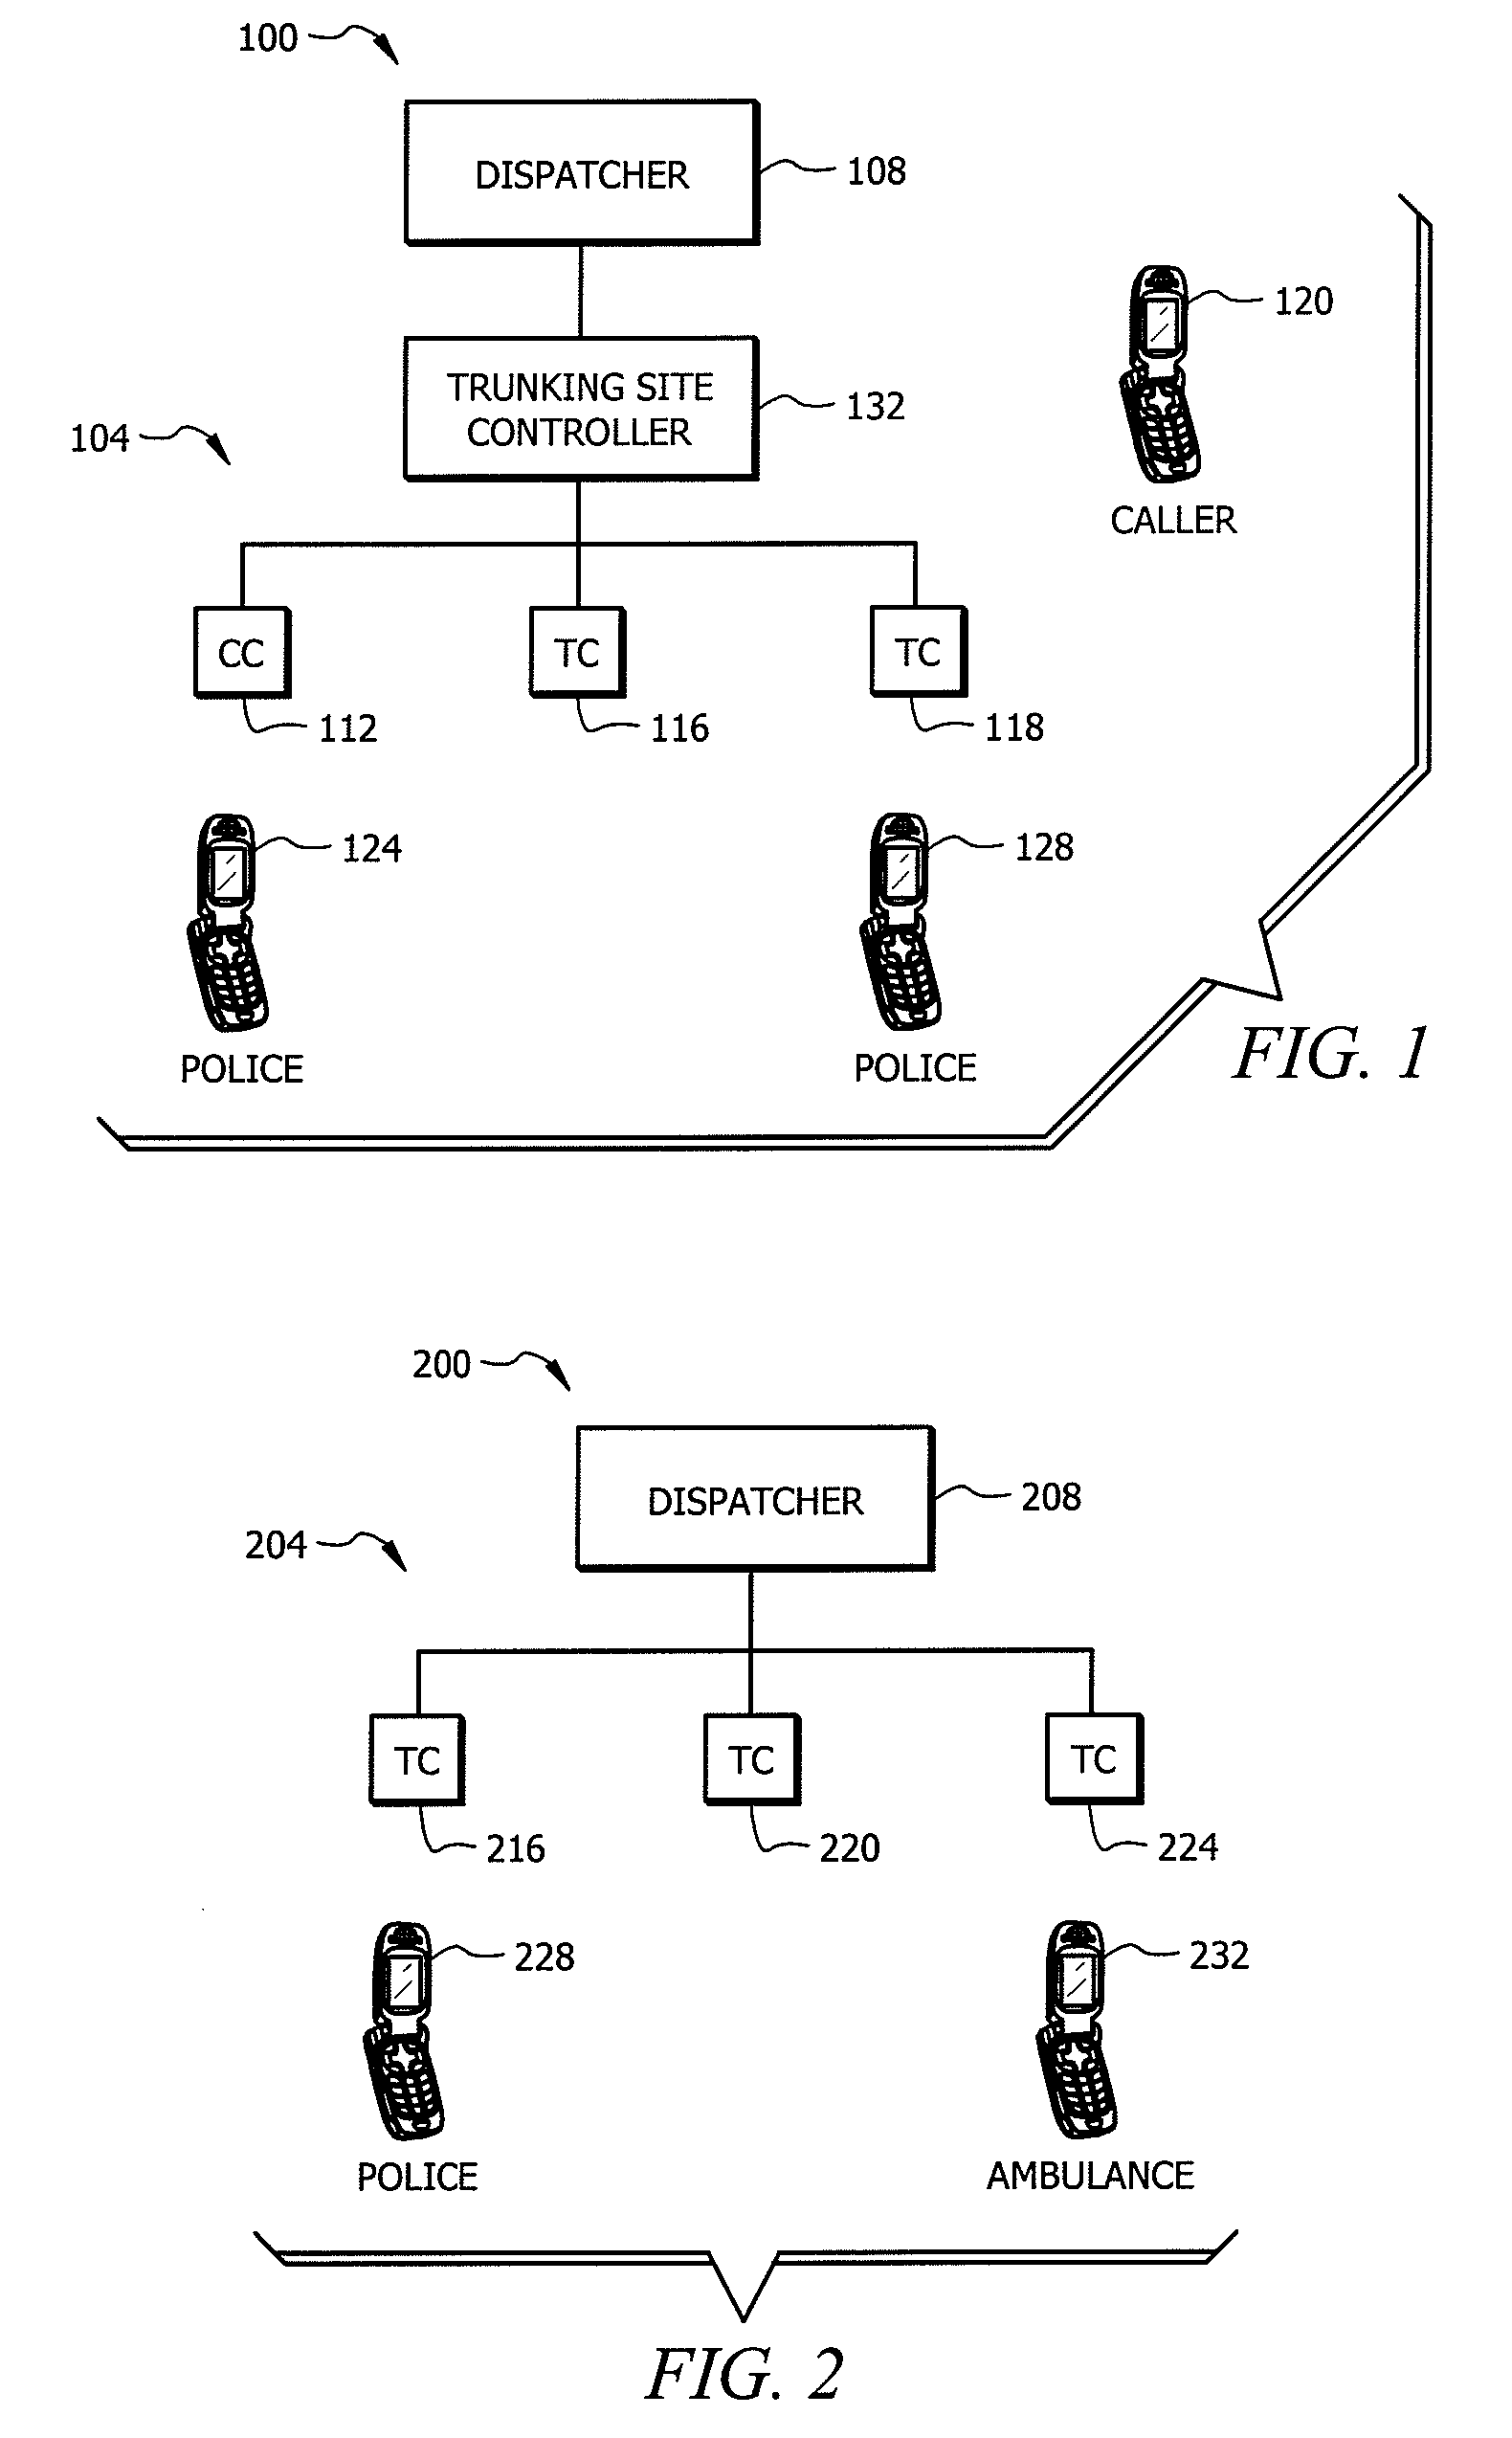 Method and system for integration of trunking and conventional land mobile radio systems